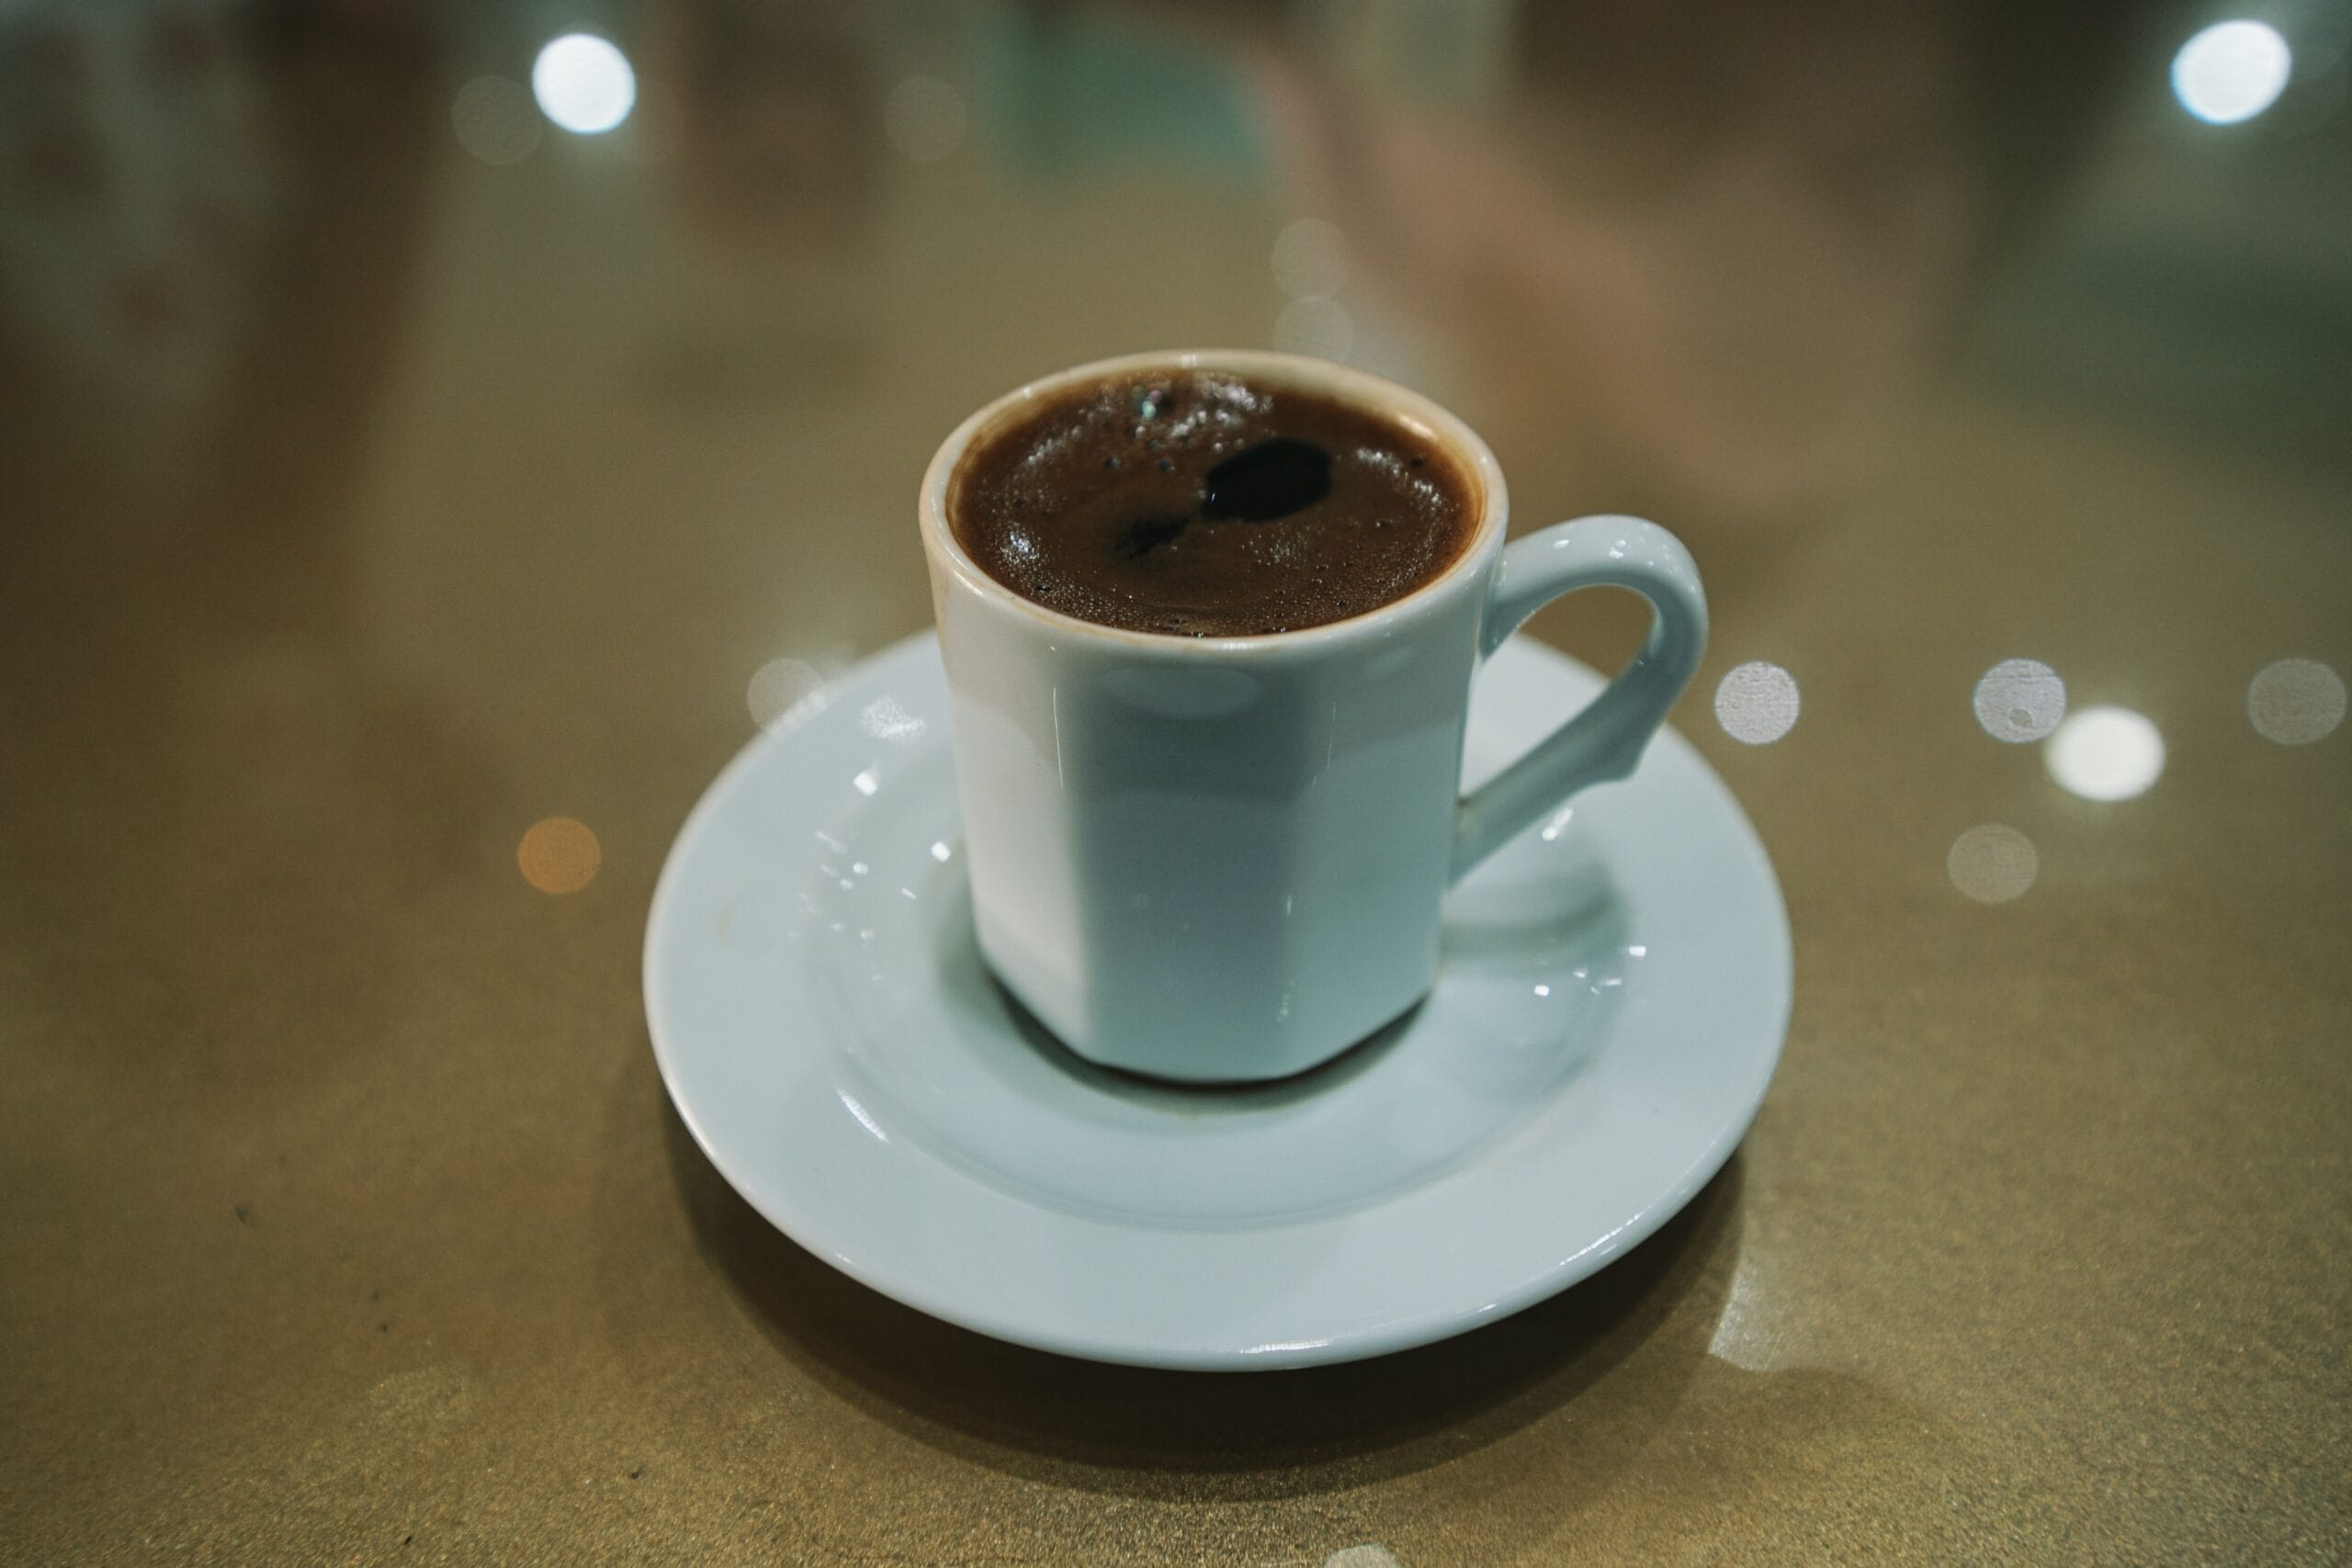 Coffee from this country of the Middle East is considered to be one of the best and unique coffees. Which country is it?